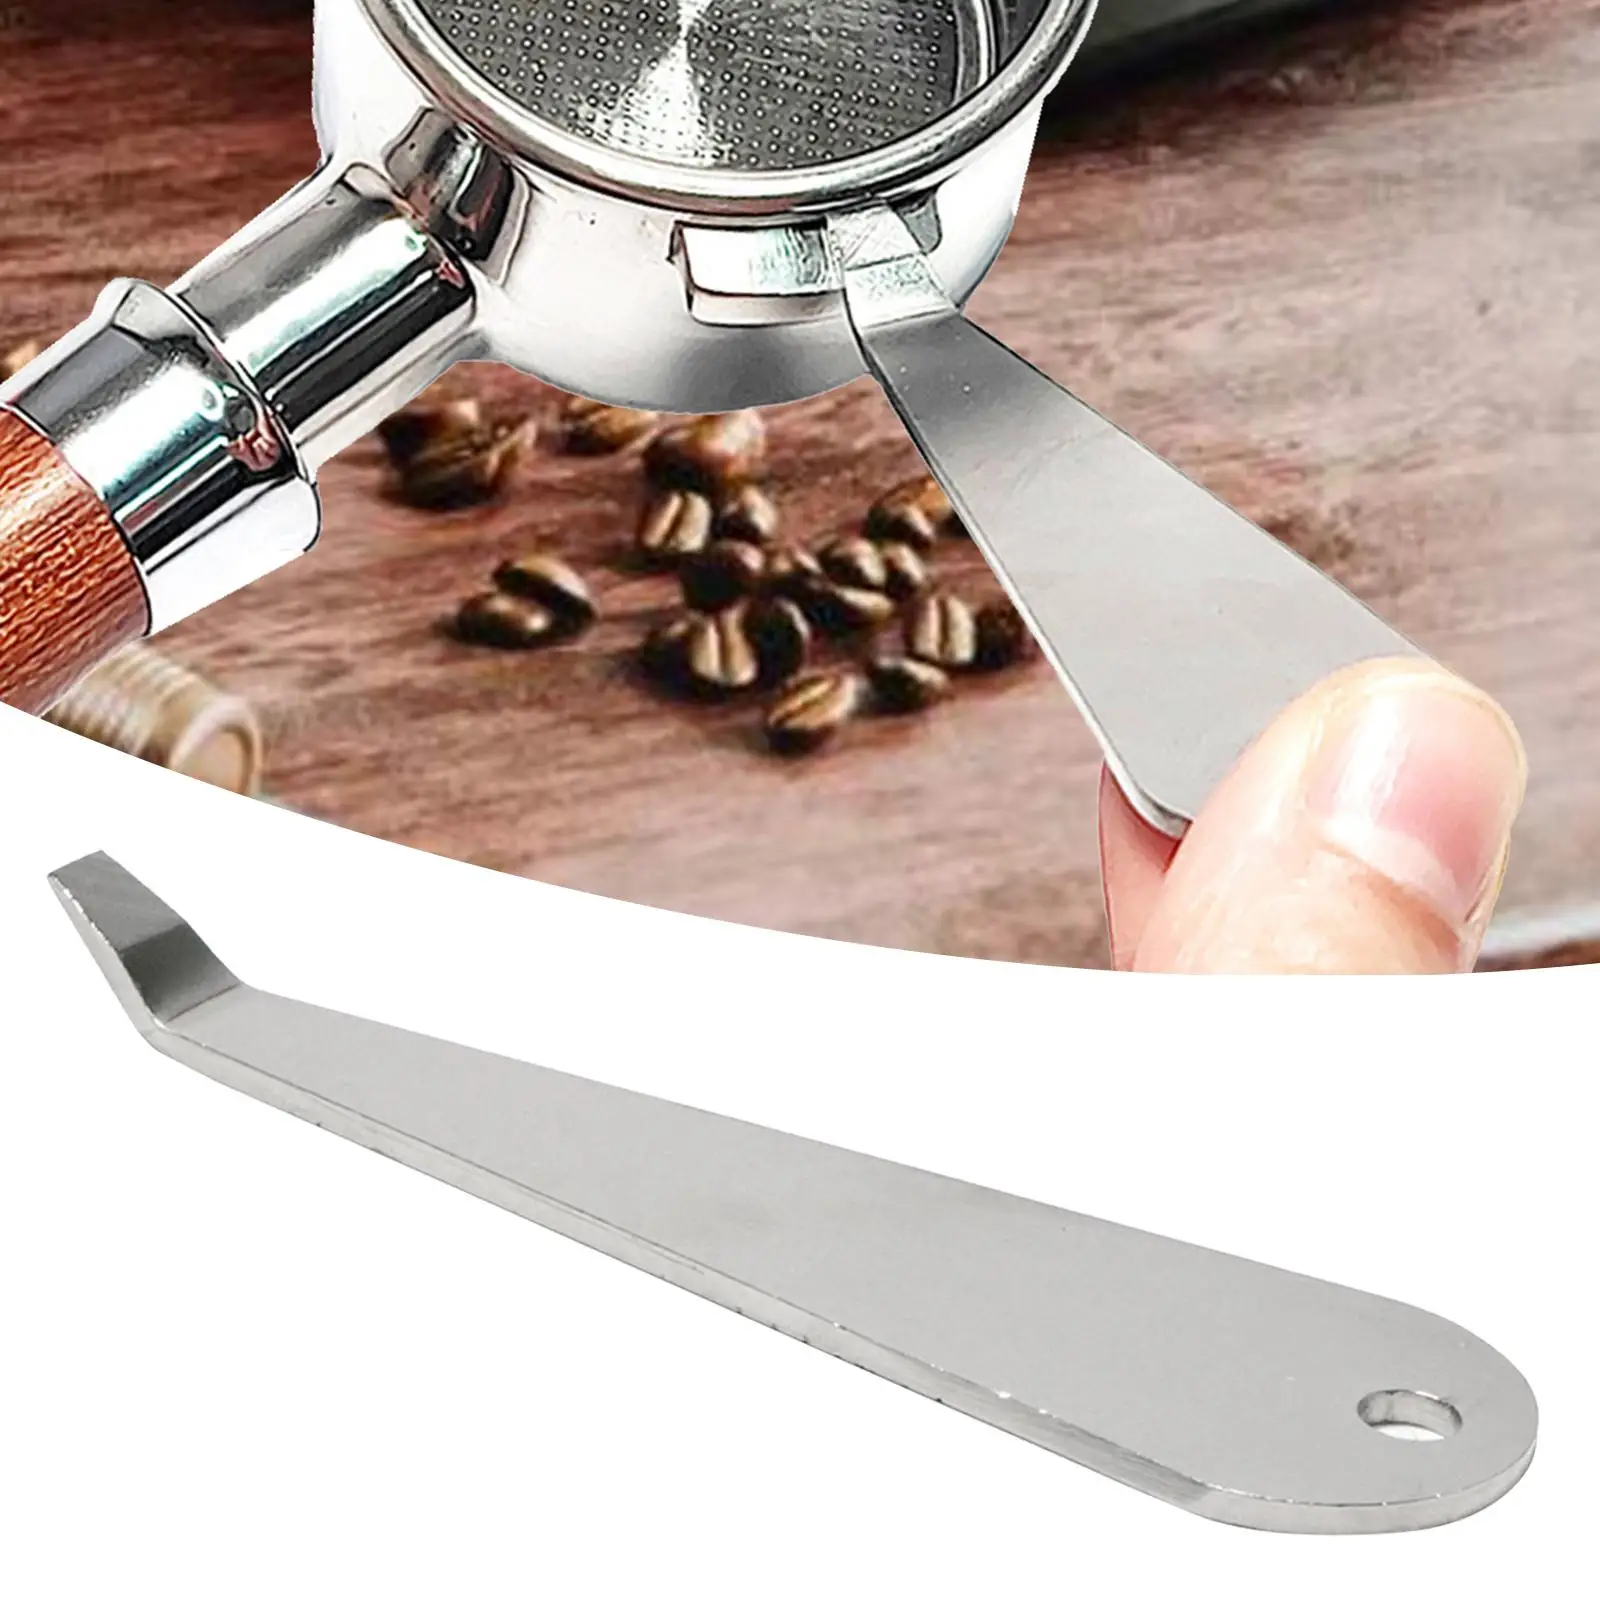 Coffee Portafilter Remover Coffee Tool, Cleaning Prying Tool, Stainless Steel Durable Portafilter Basket Removal Tool,